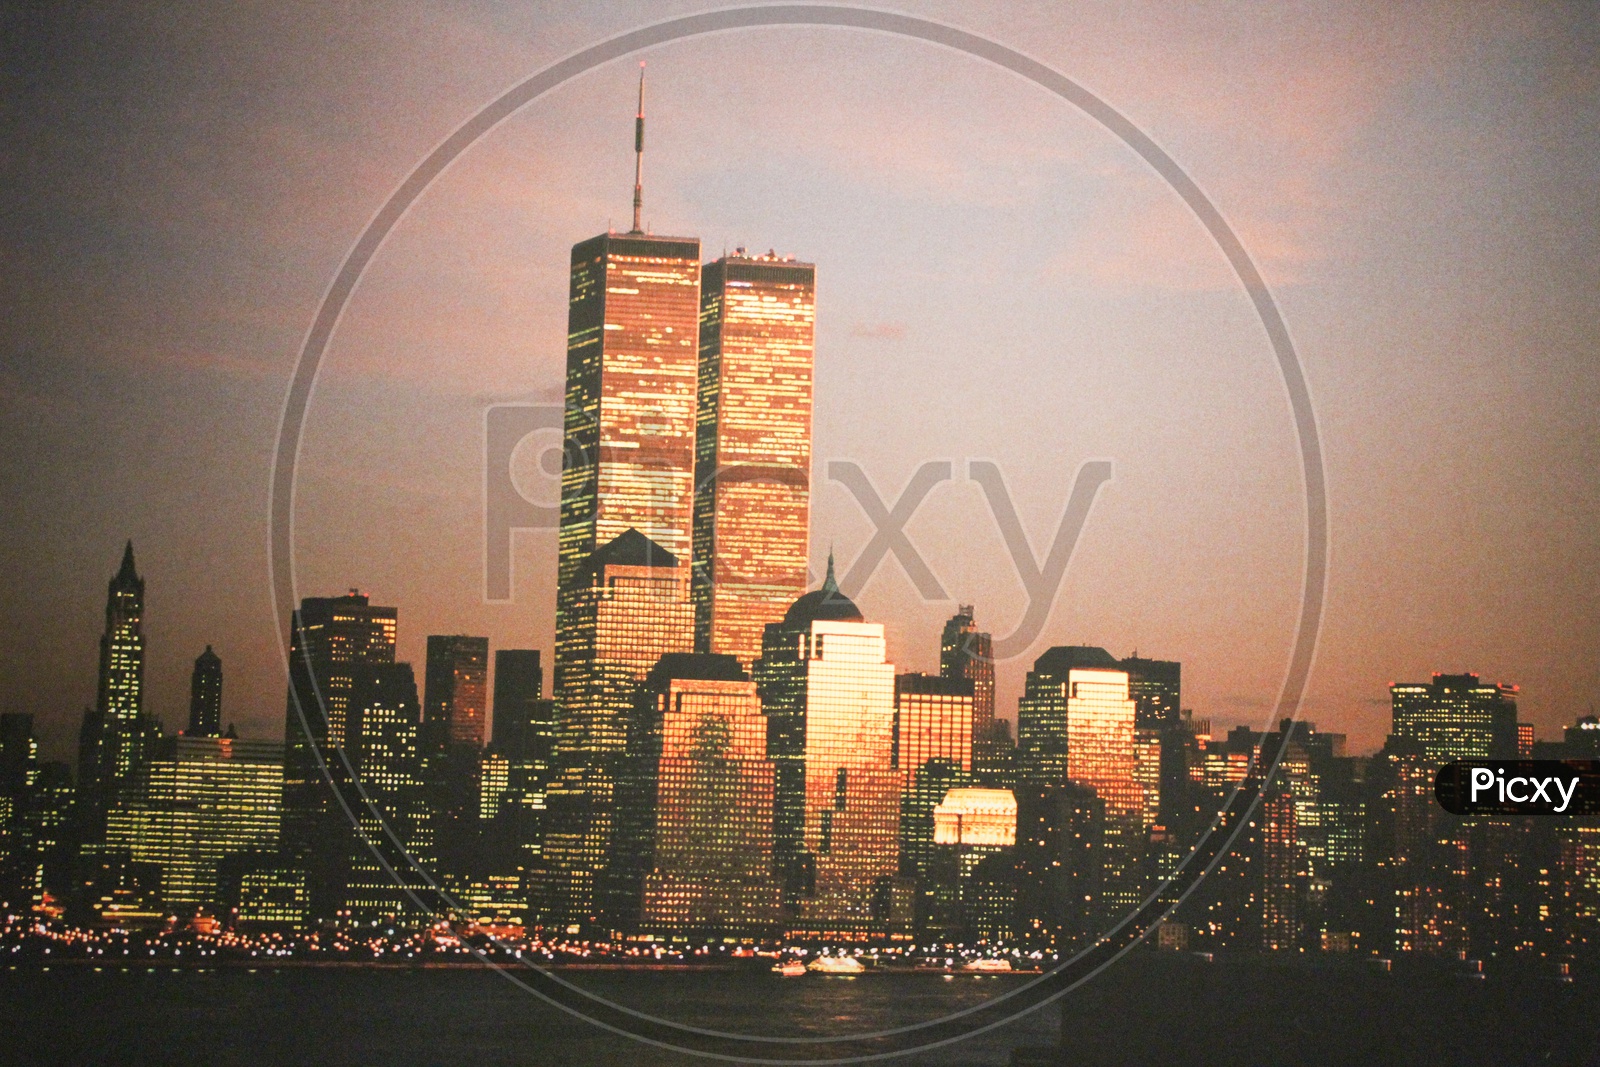 World Trade Center Twin Towers before they were attacked on 9/11.